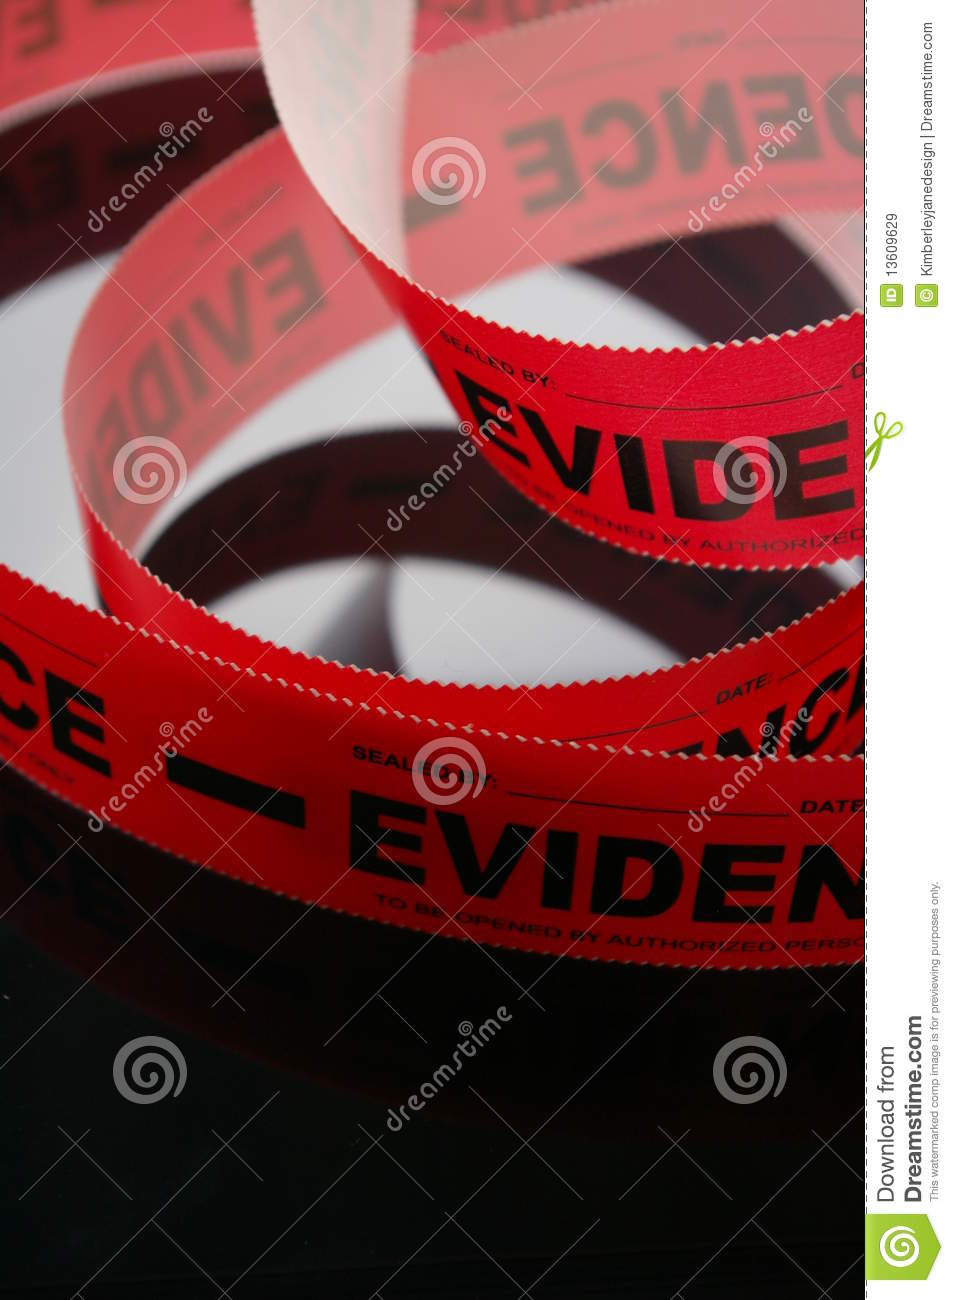 Evidence Tape On A Reflective Surface  Used To Bag And Tag Evidence In